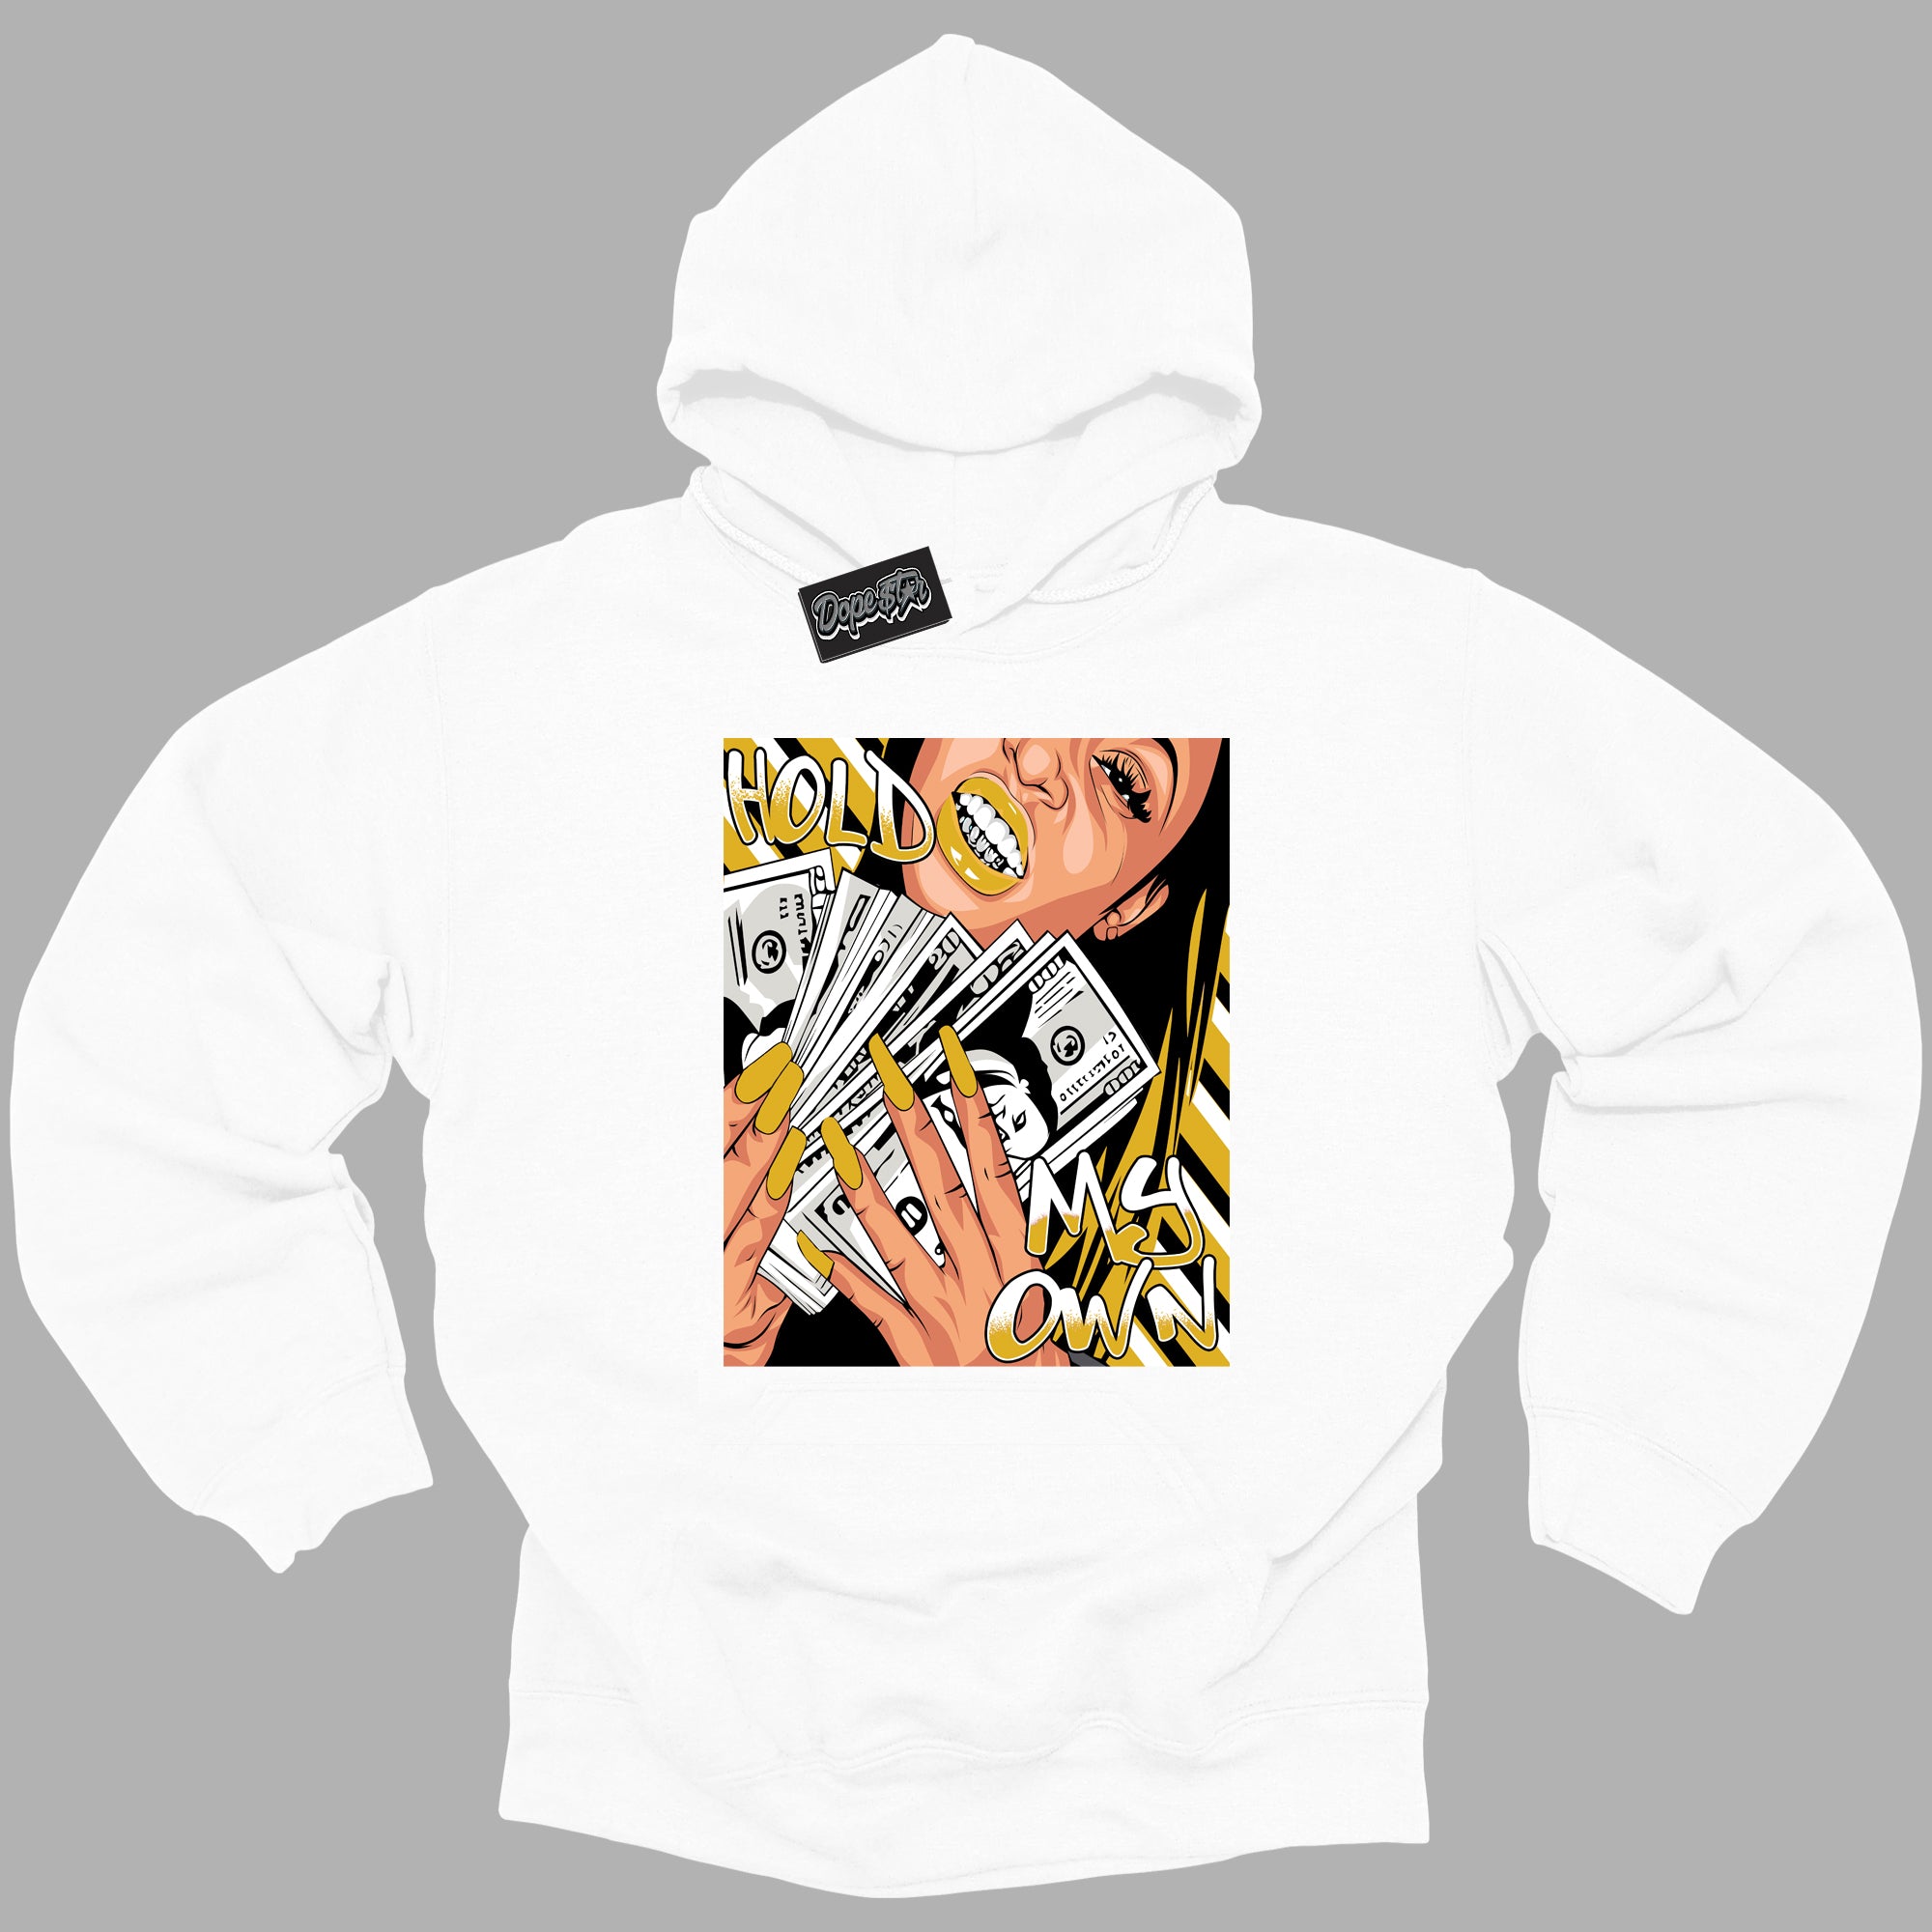 Cool White Hoodie with “ Hold My Own ”  design that Perfectly Matches Yellow Ochre 6s Sneakers.